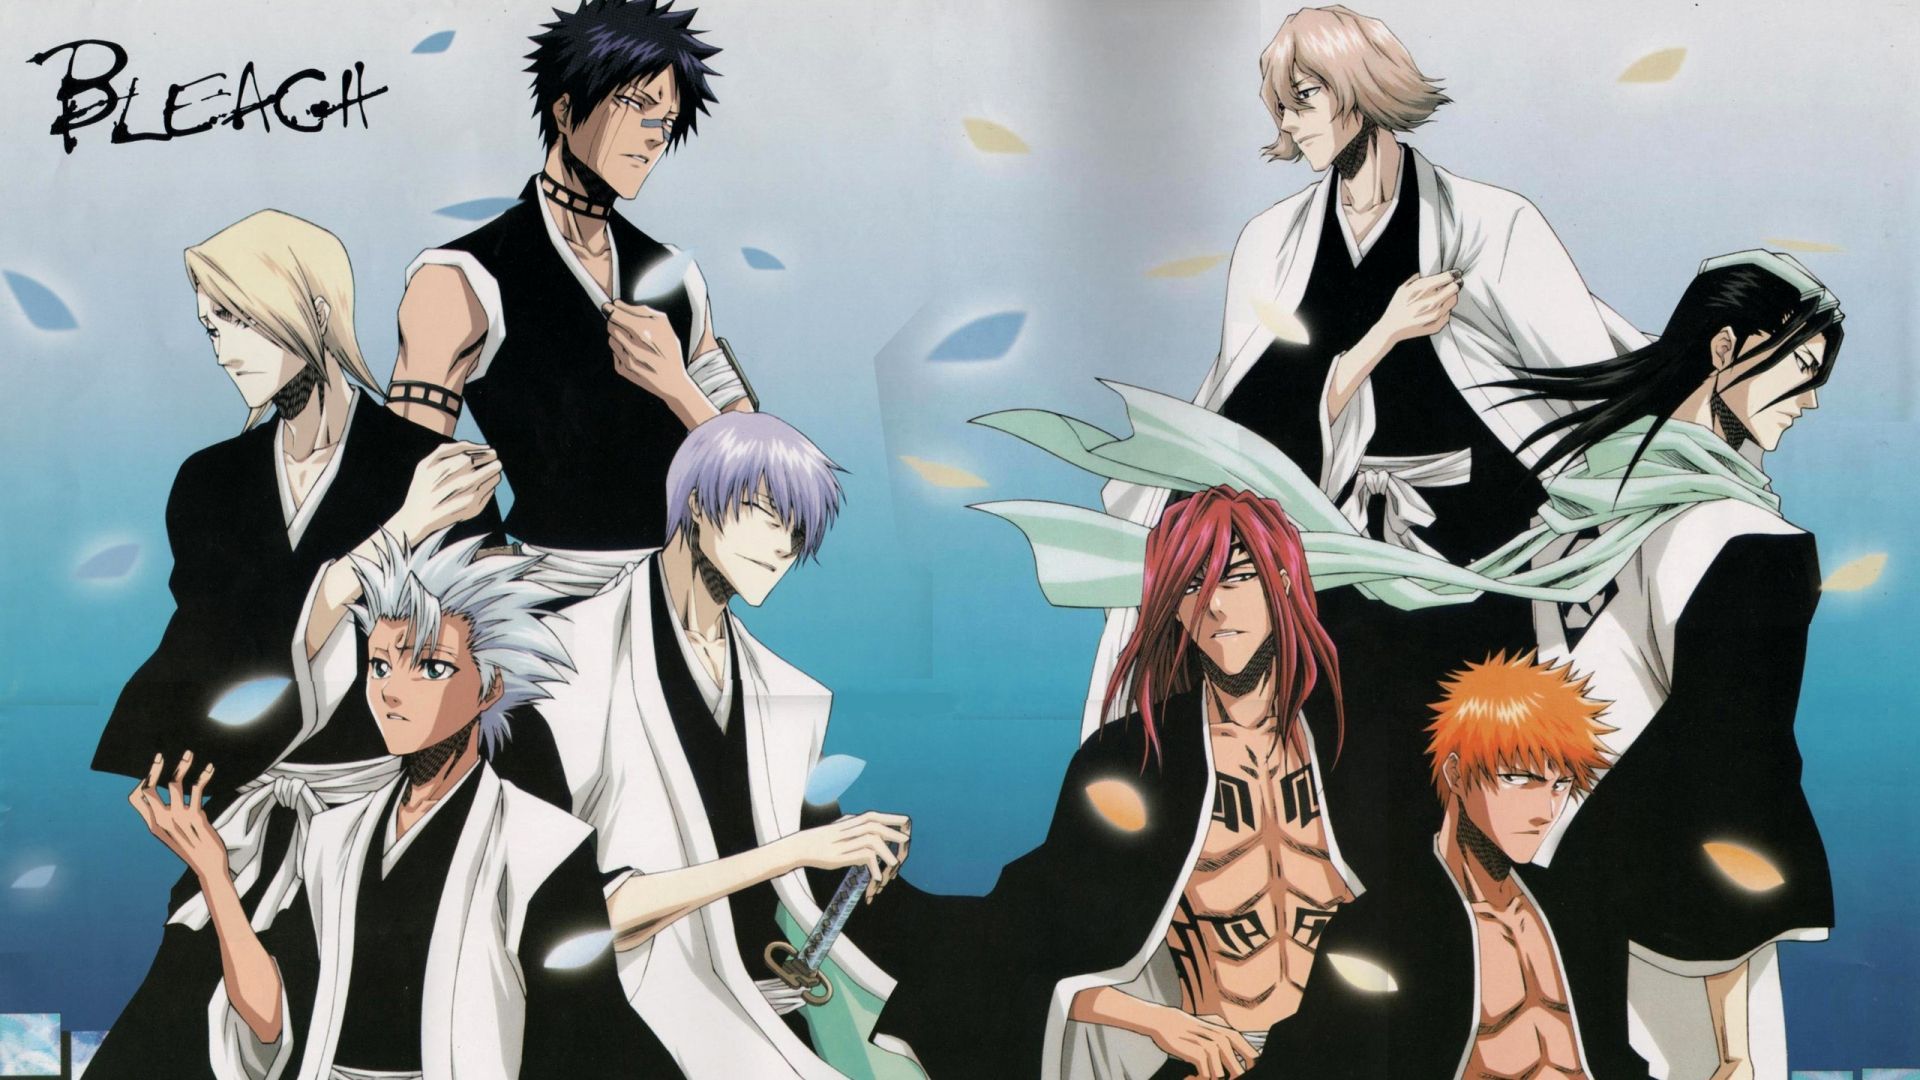 Download Bleach Characters Anime Wallpaper 1920x1080 | Full HD ...